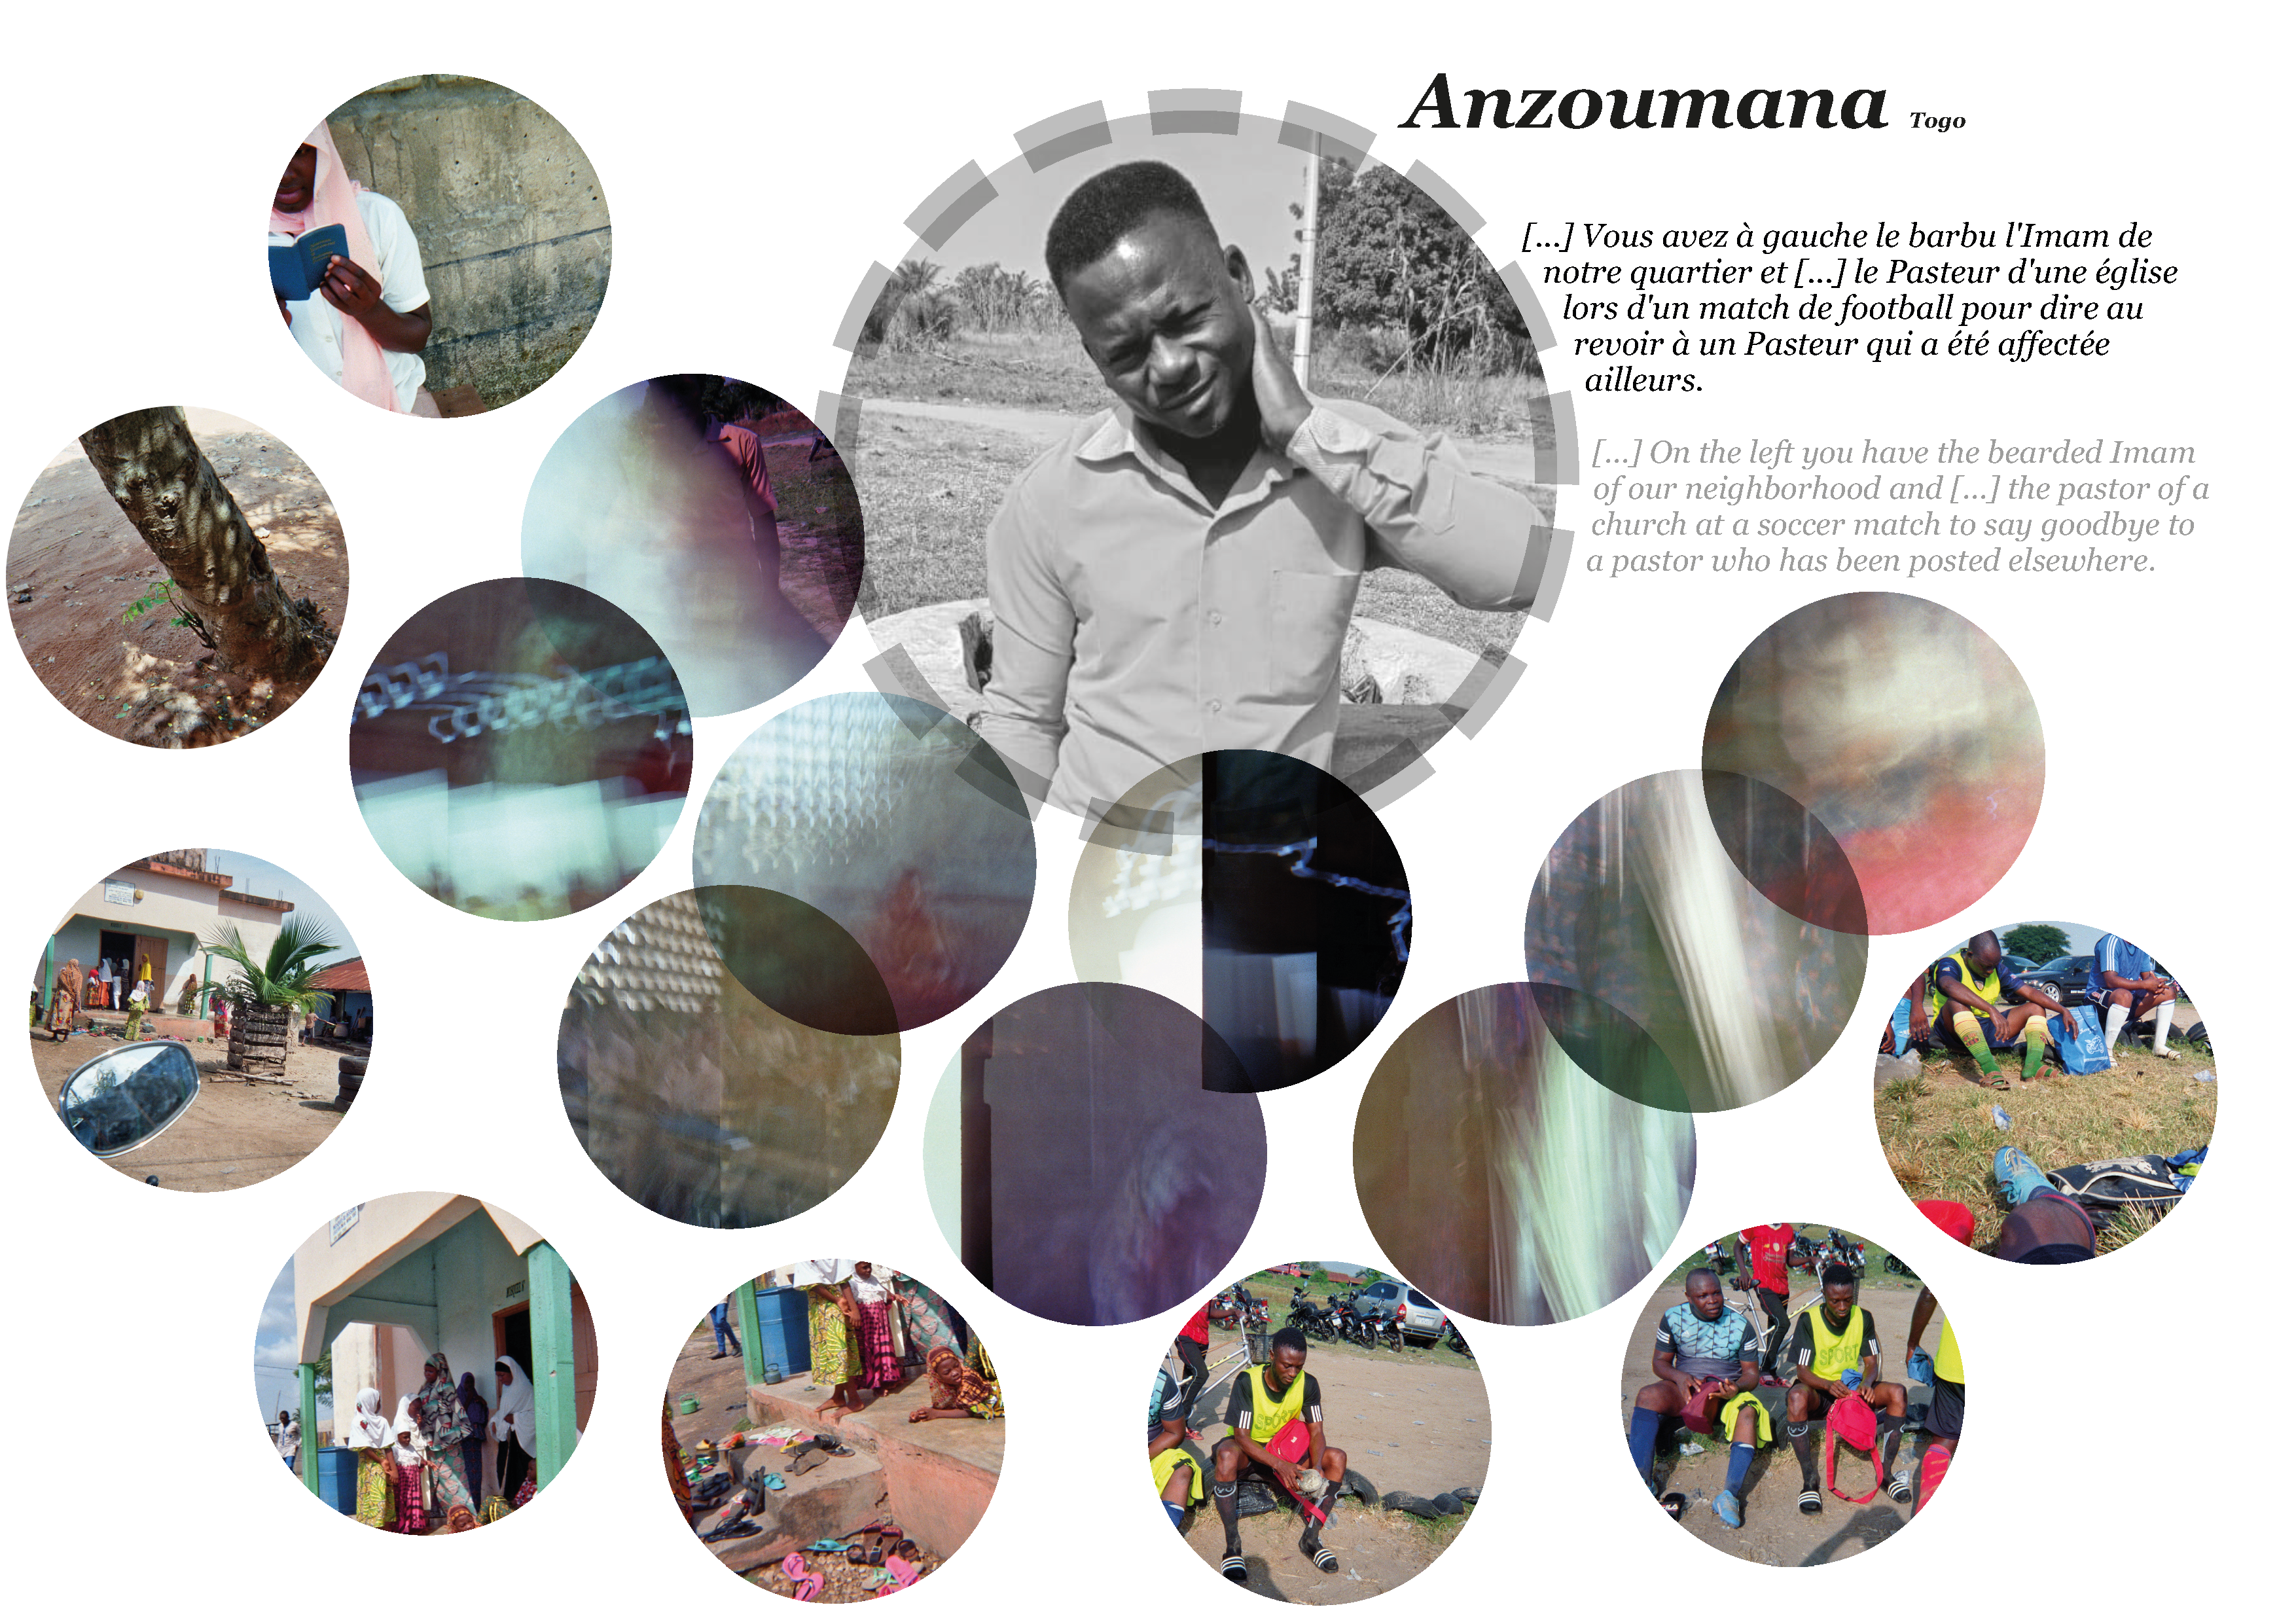 Collage of pictures of religion and peace by Anzoumana in Togo